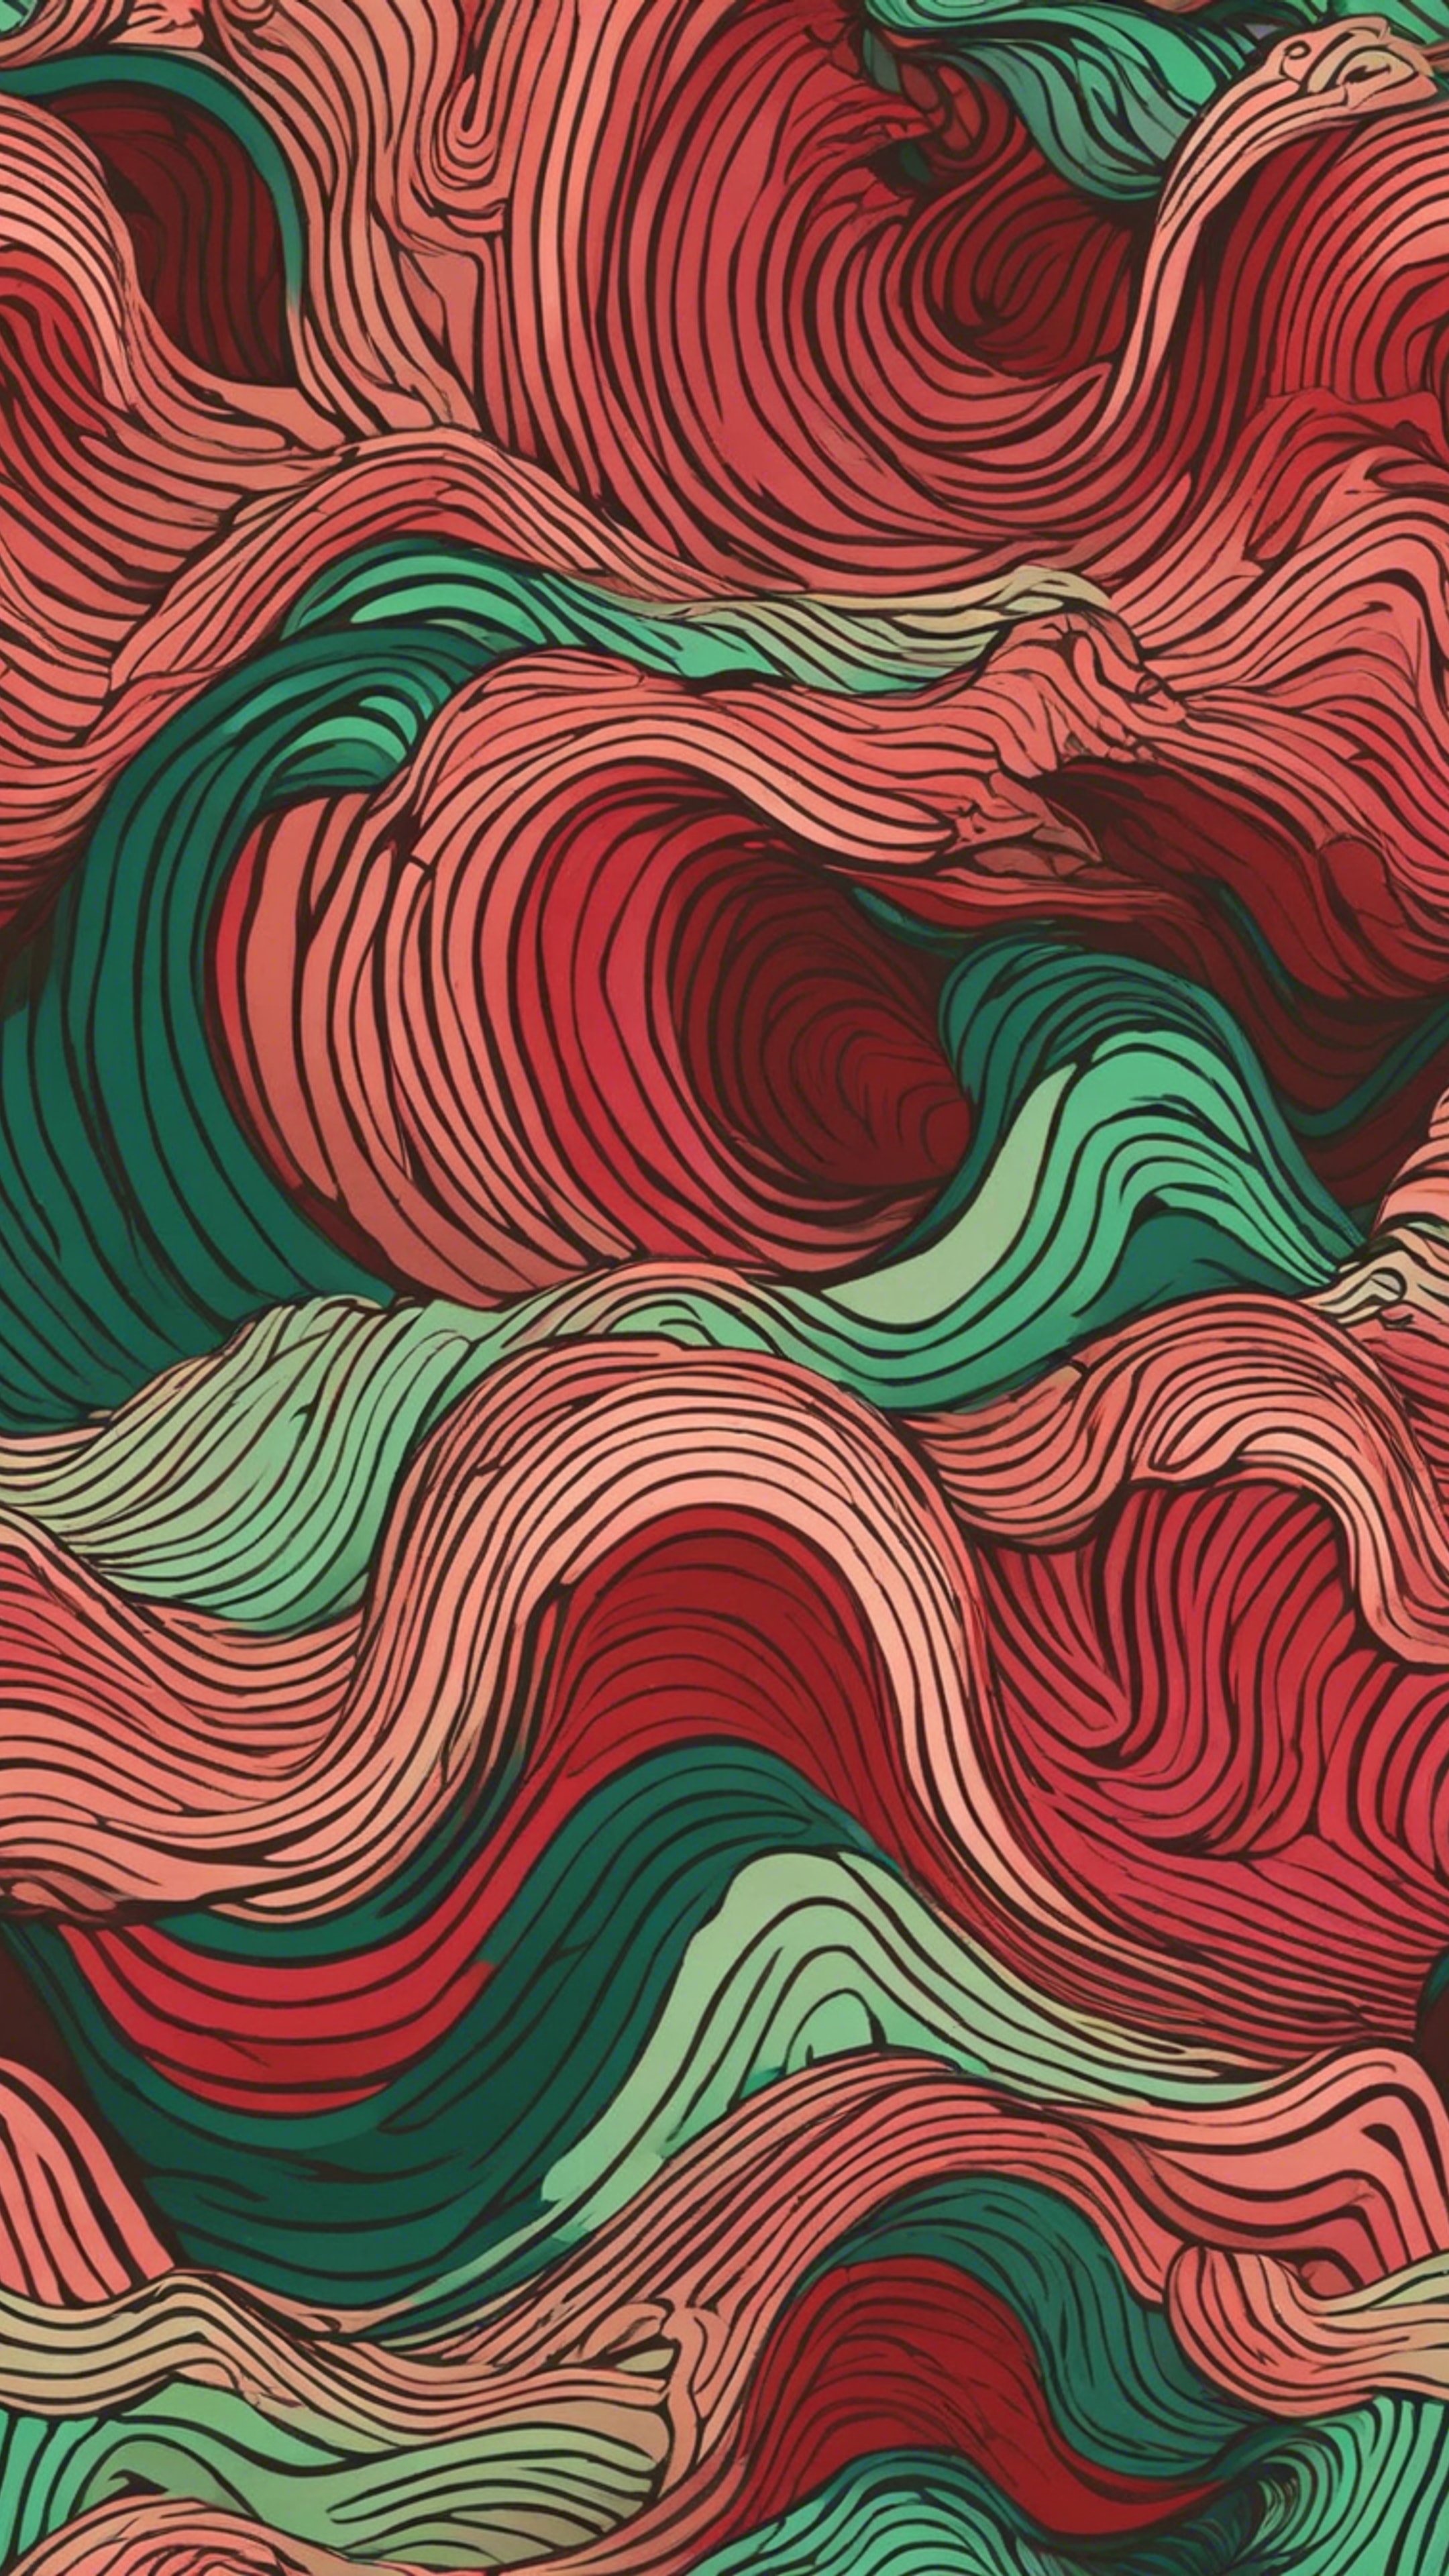 A seamless pattern of psychedelic waves in shades of red and green Wallpaper[bae359149b2a4b65b3de]